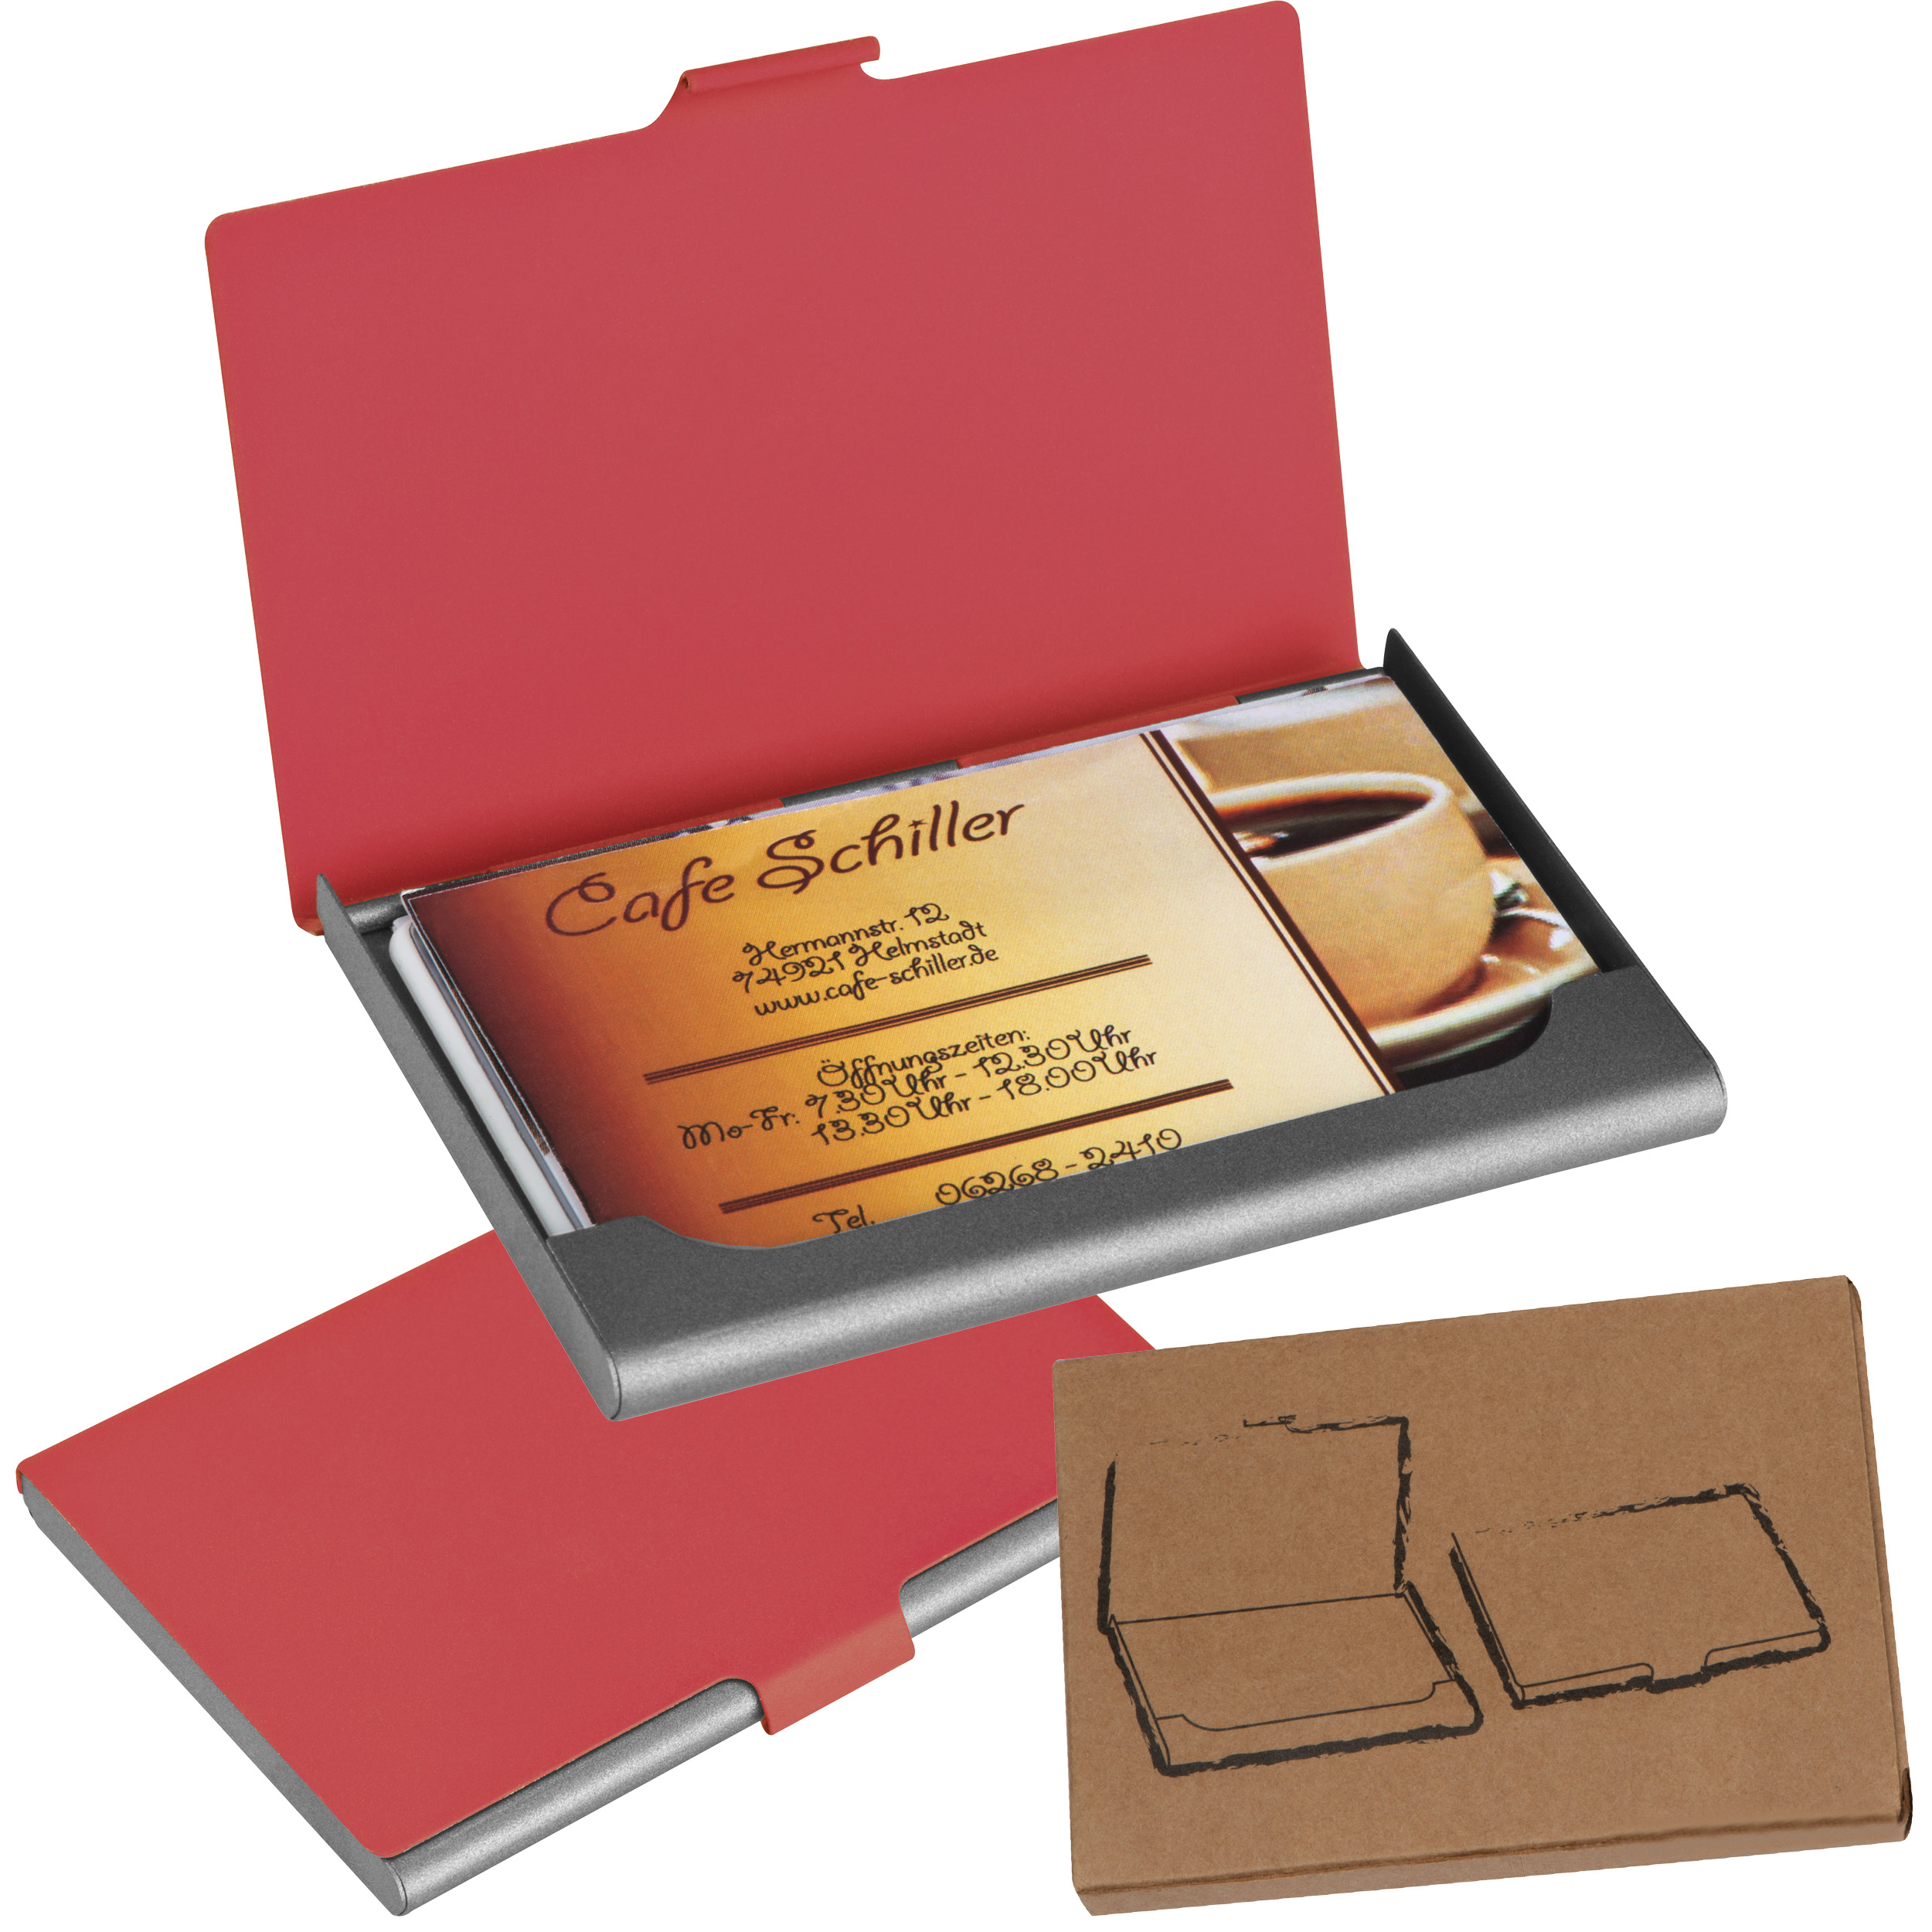 Rubberized business card holder